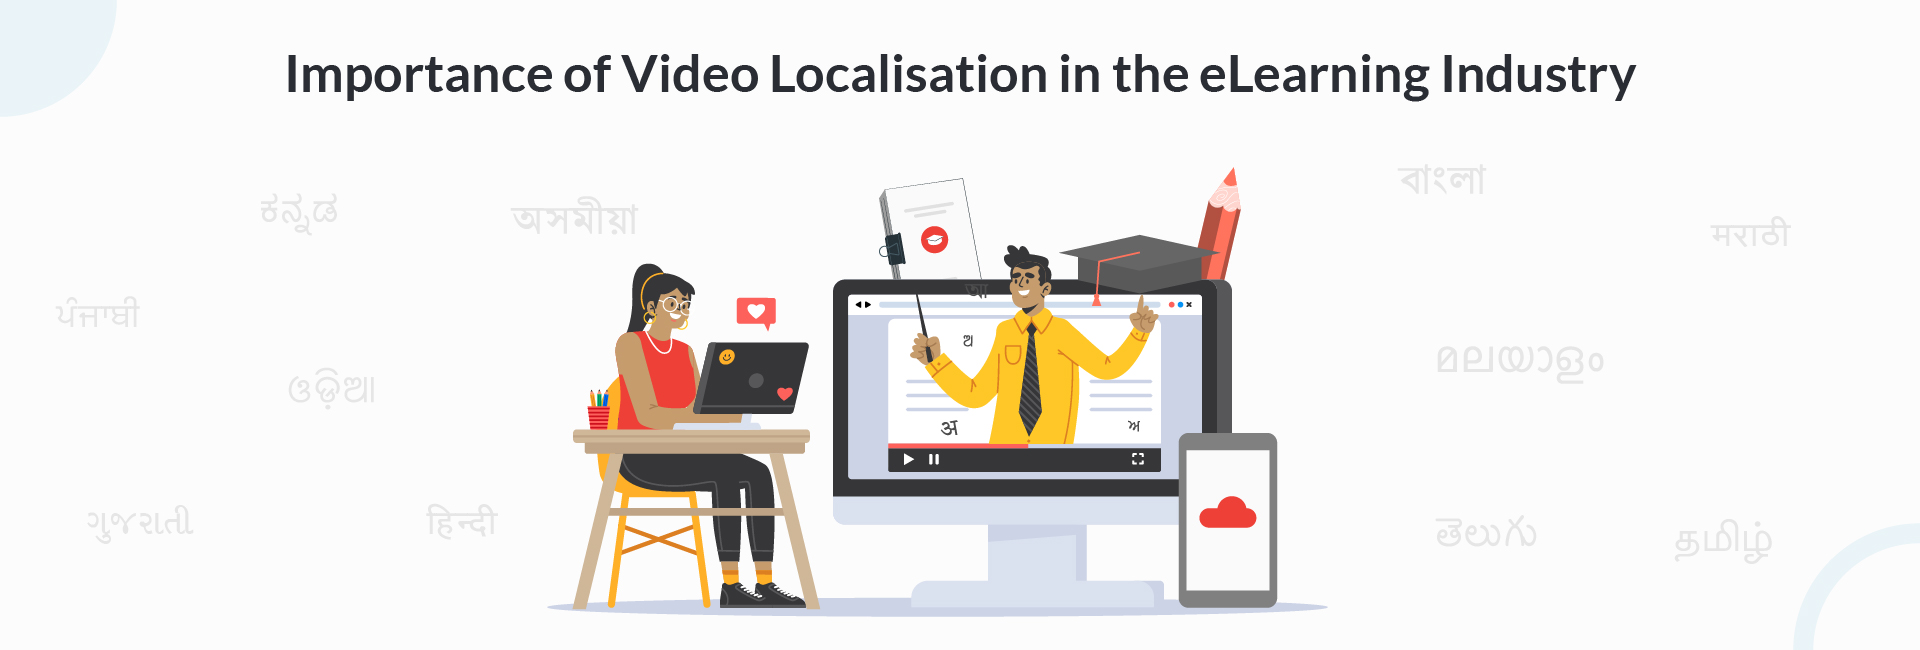 Importance of Video Localisation in the eLearning Industry